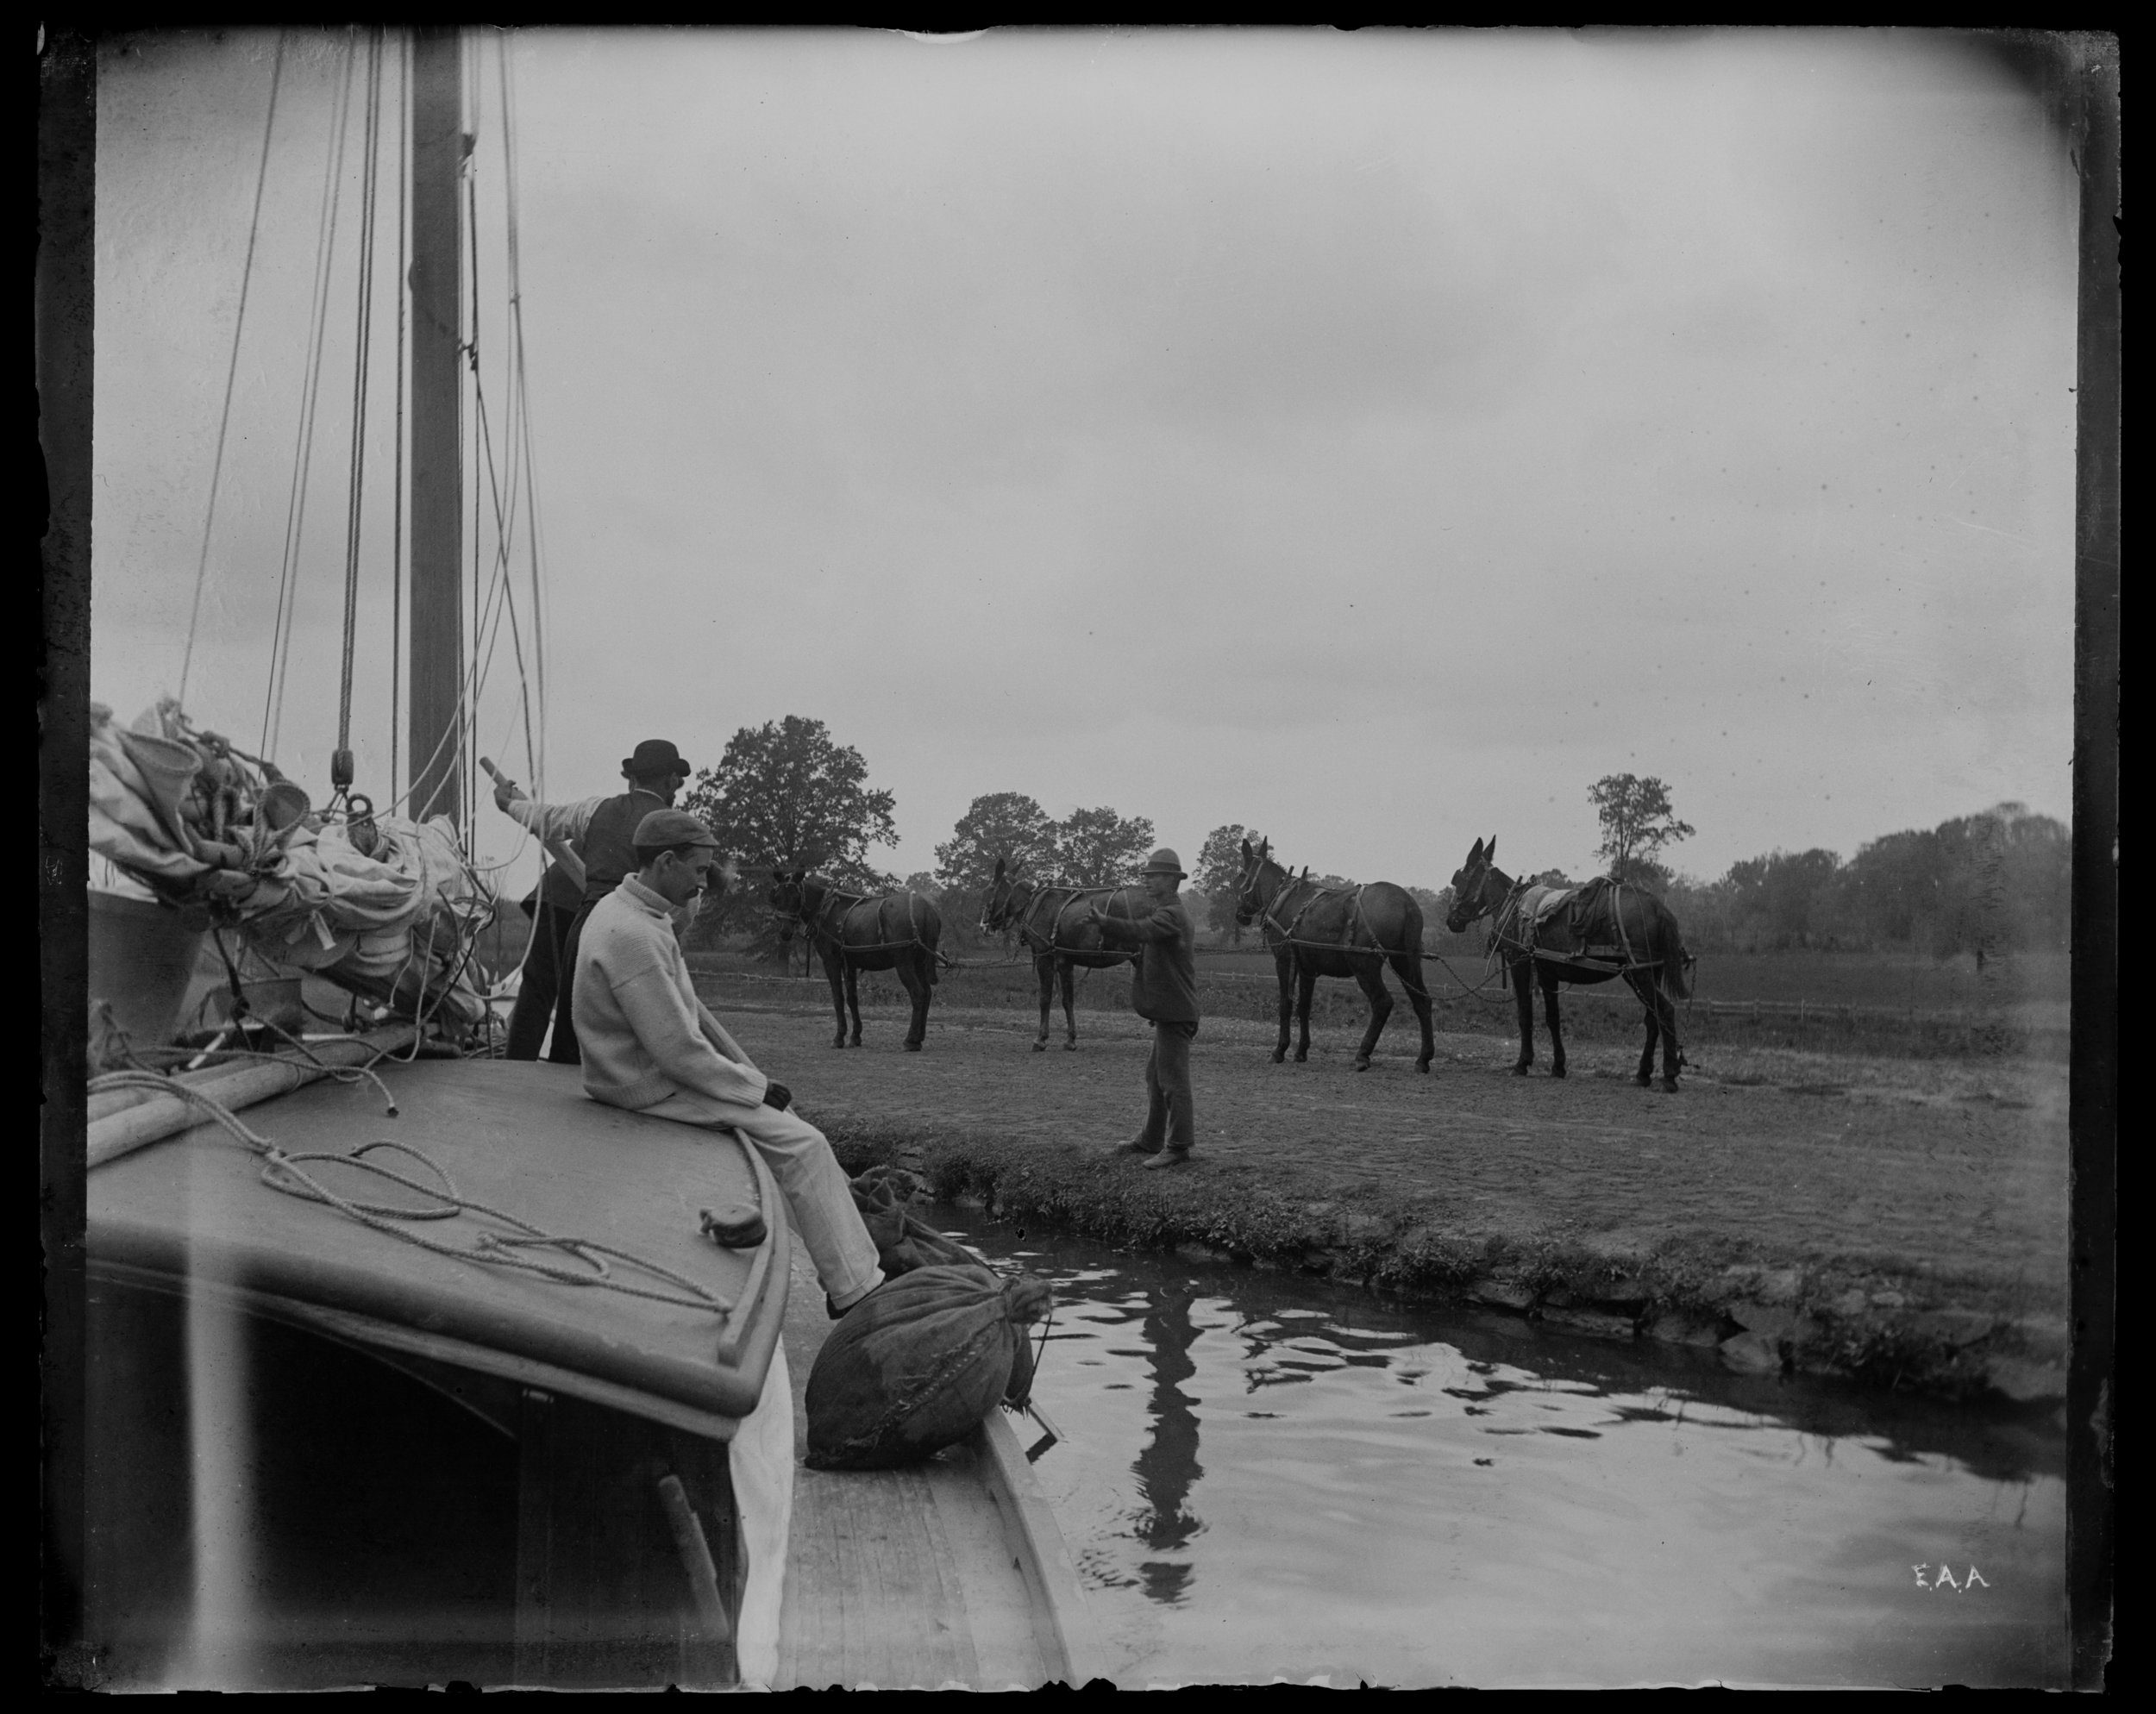 “Four mules &amp; Wabun,” on the yacht “Wabun” in the Delaware and Raritan Canal, New Jersey, October 18, 1892